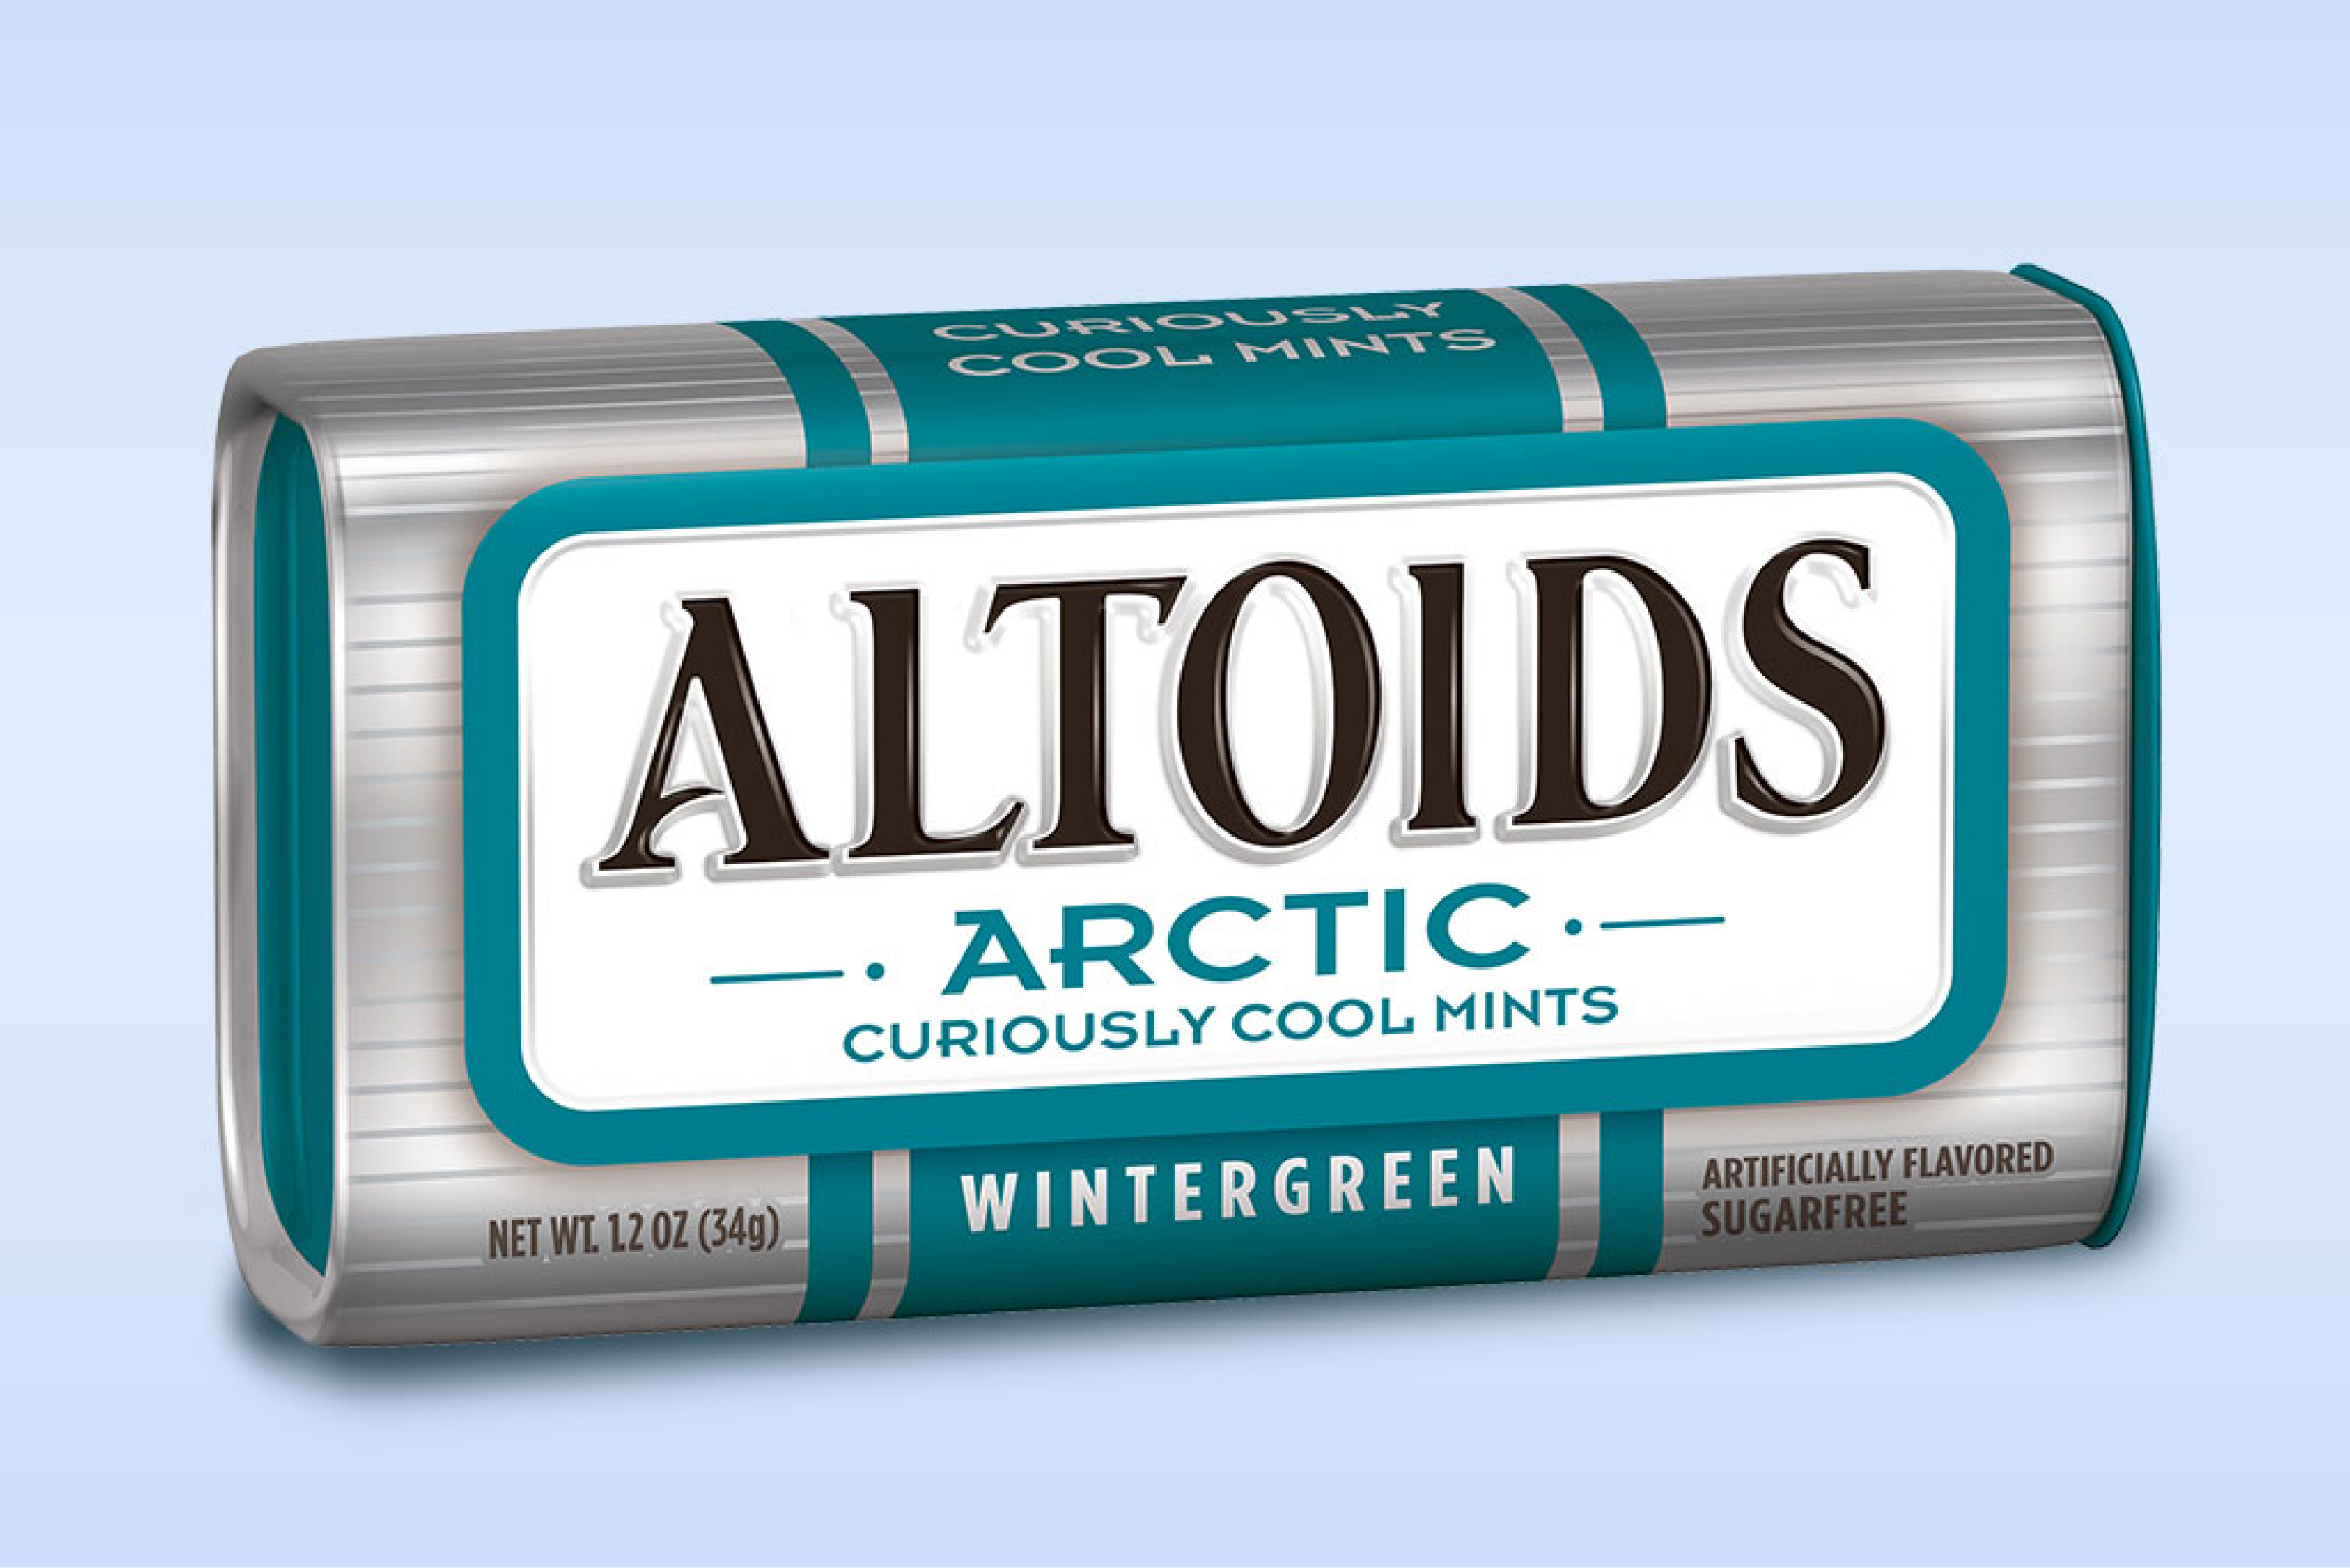 Tin of Wintergreen Arctic Altoids on a blue background